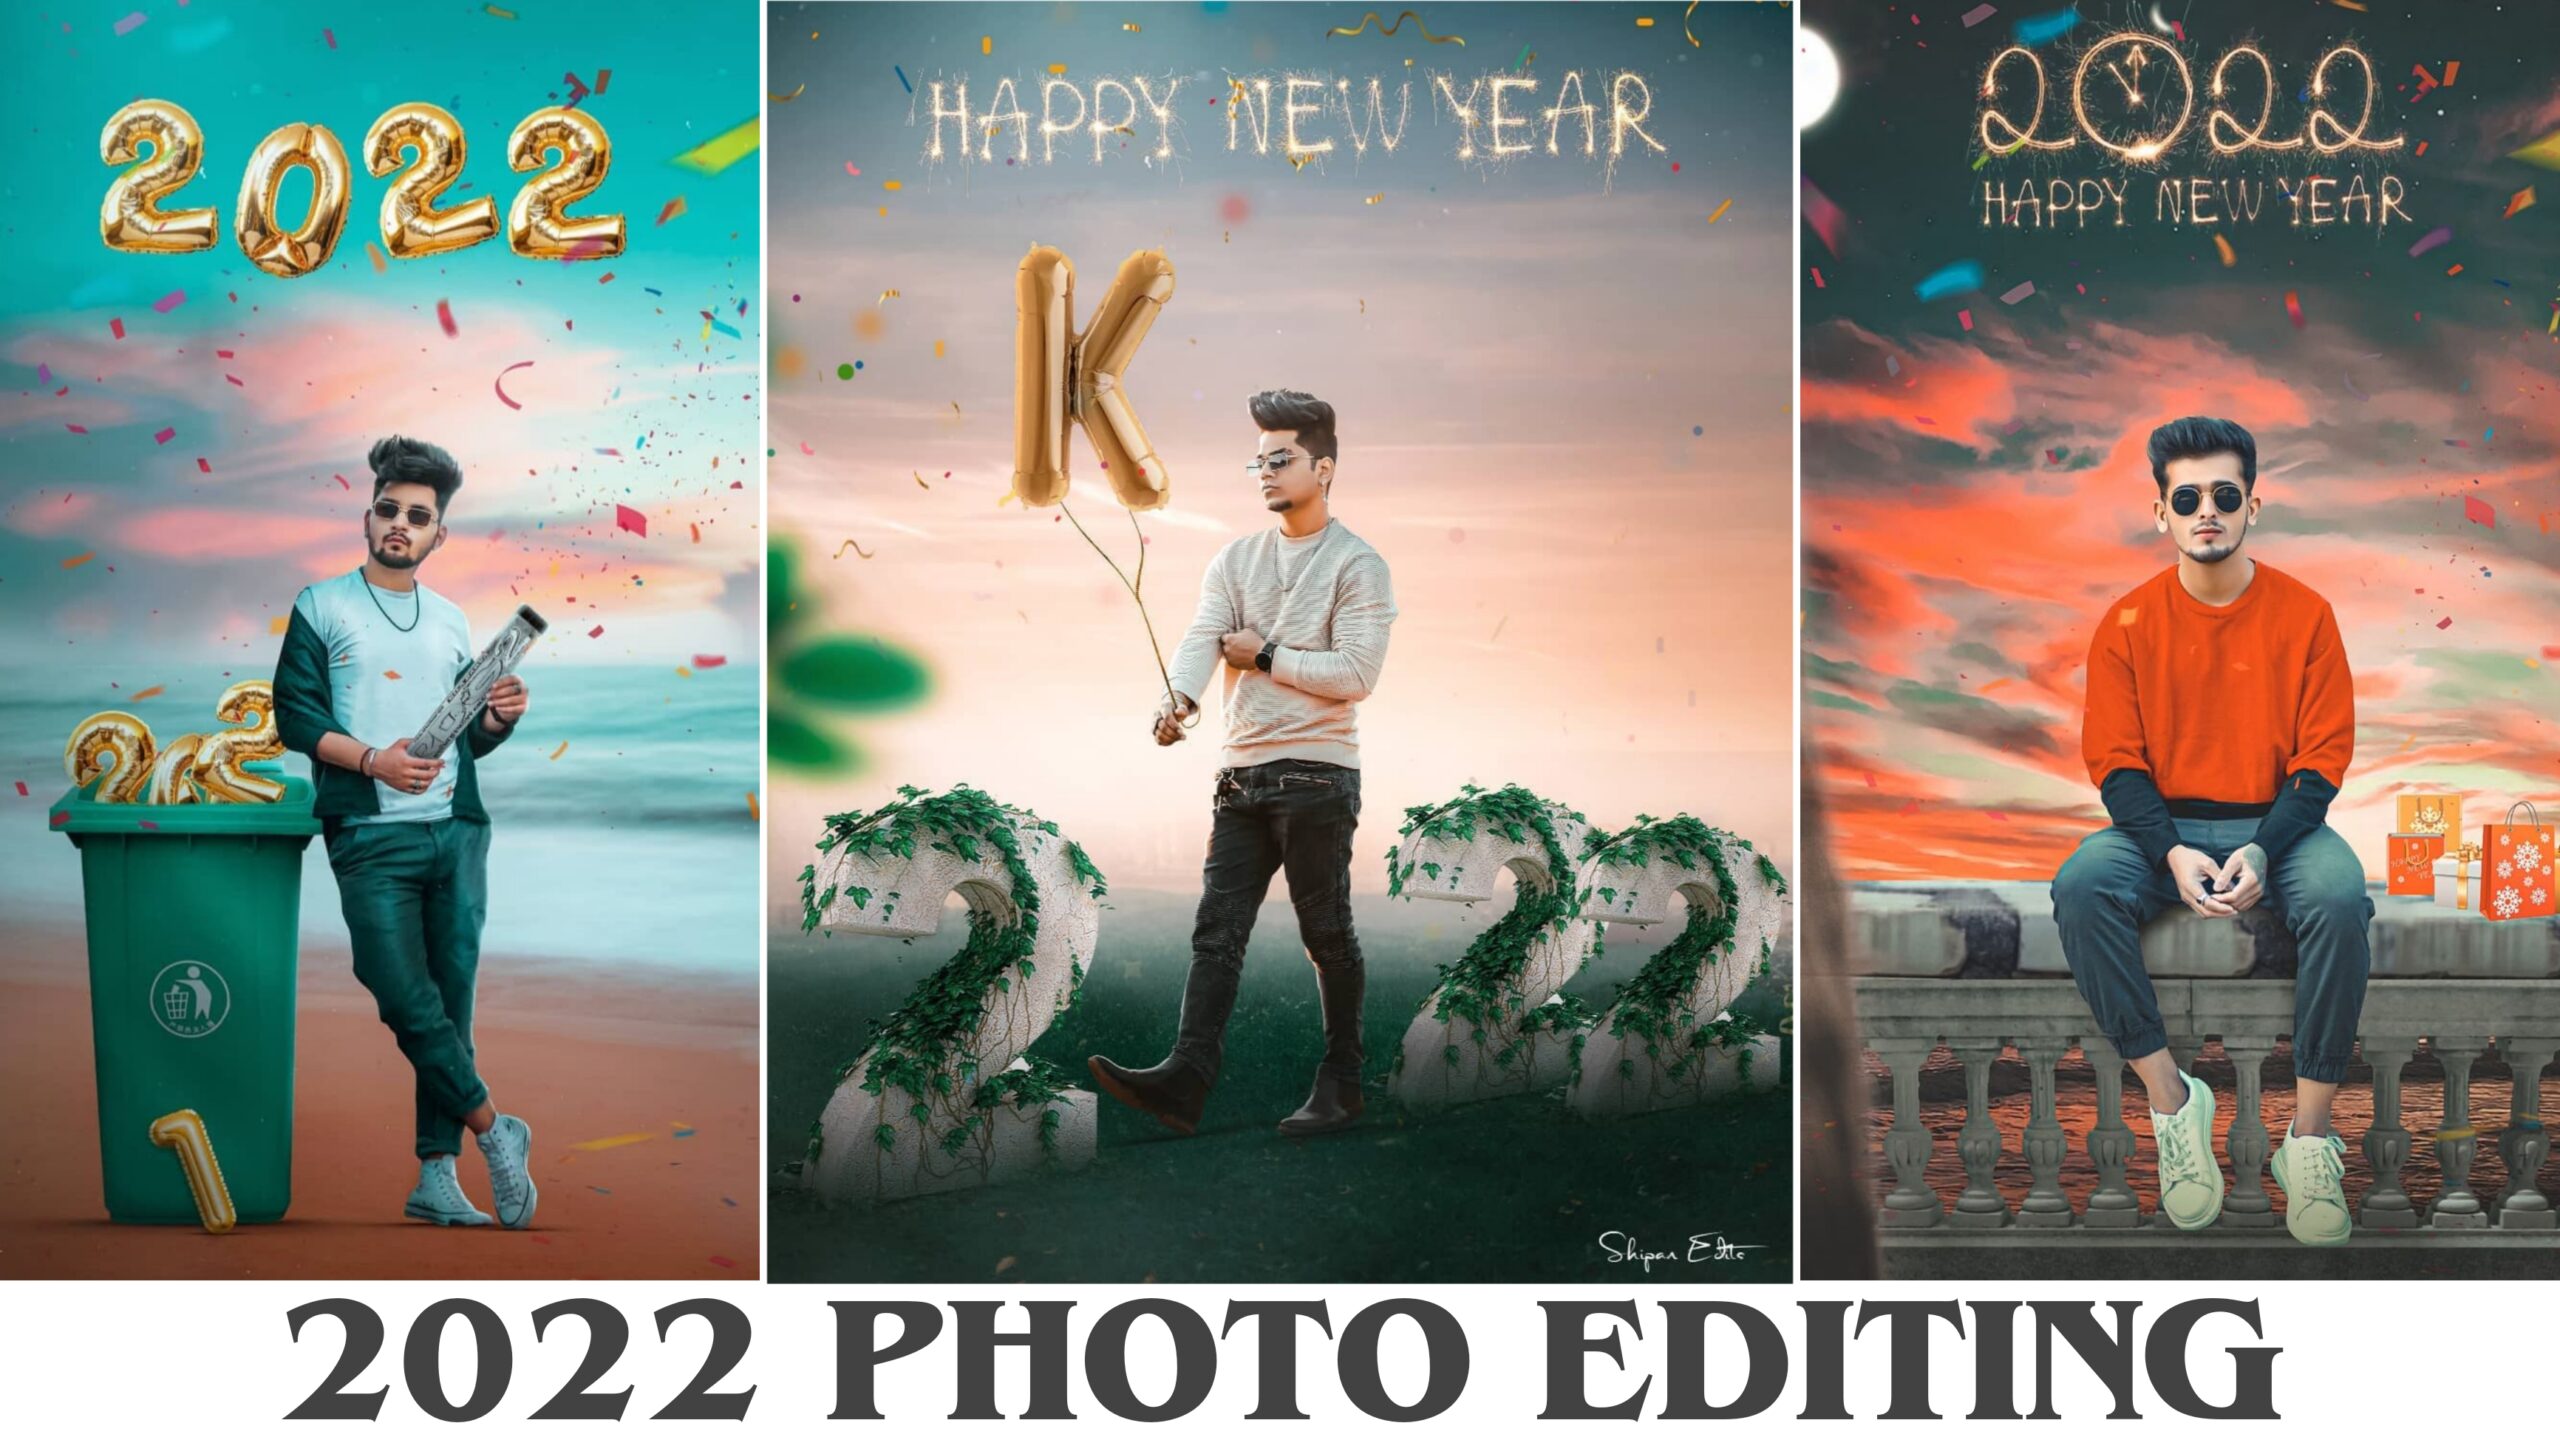 New year 2022 photo editing background and png download free